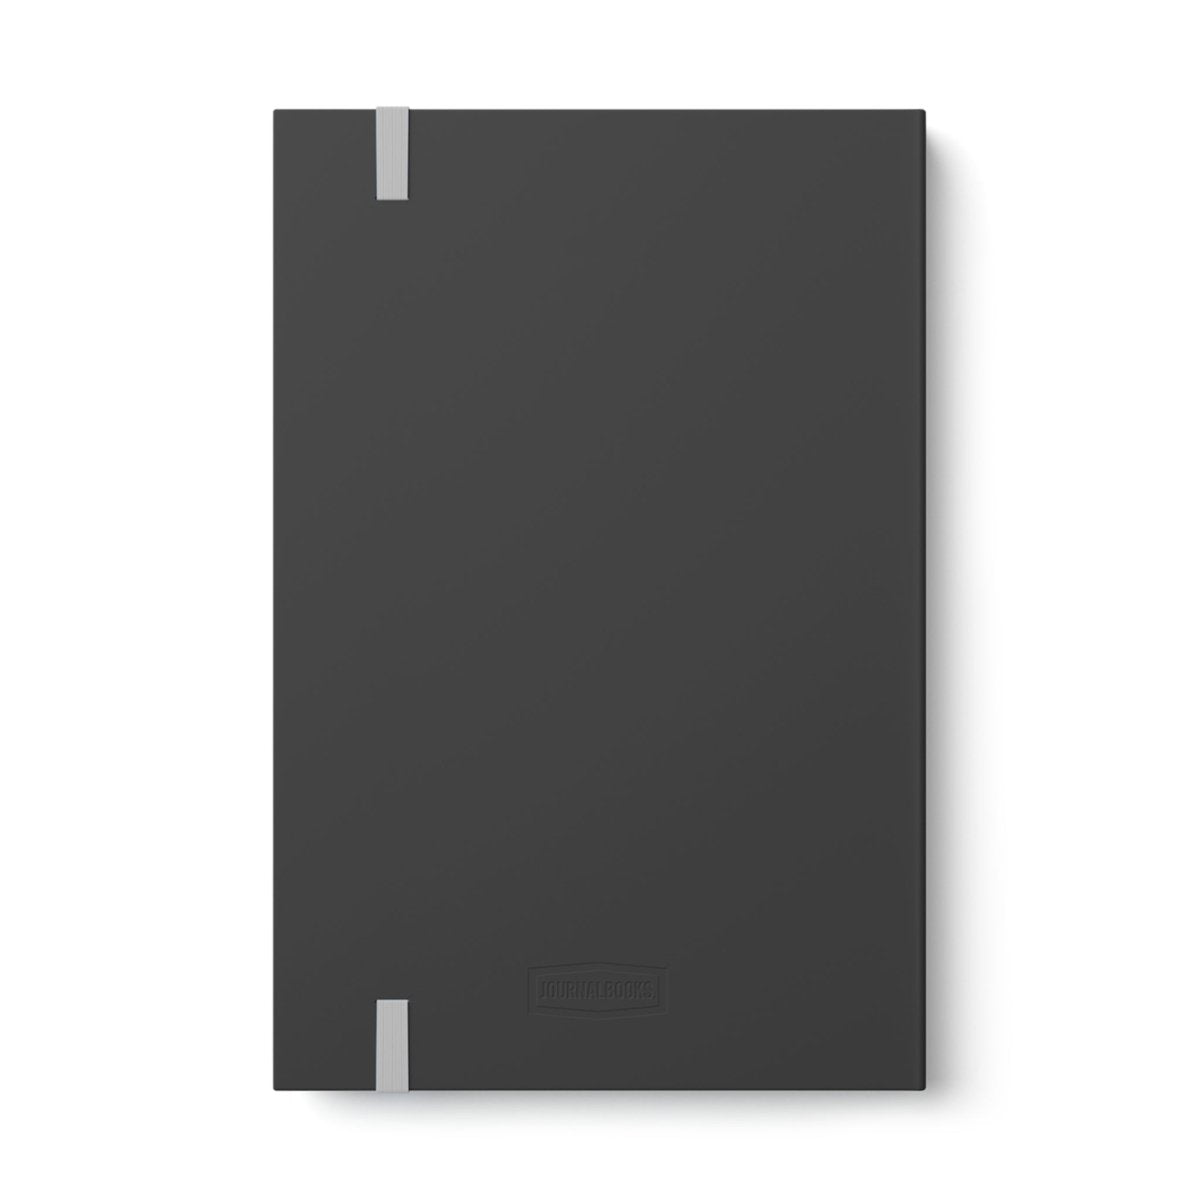 Royal Cat Color Contrast Notebook - Ruled Style A - DarzyStore